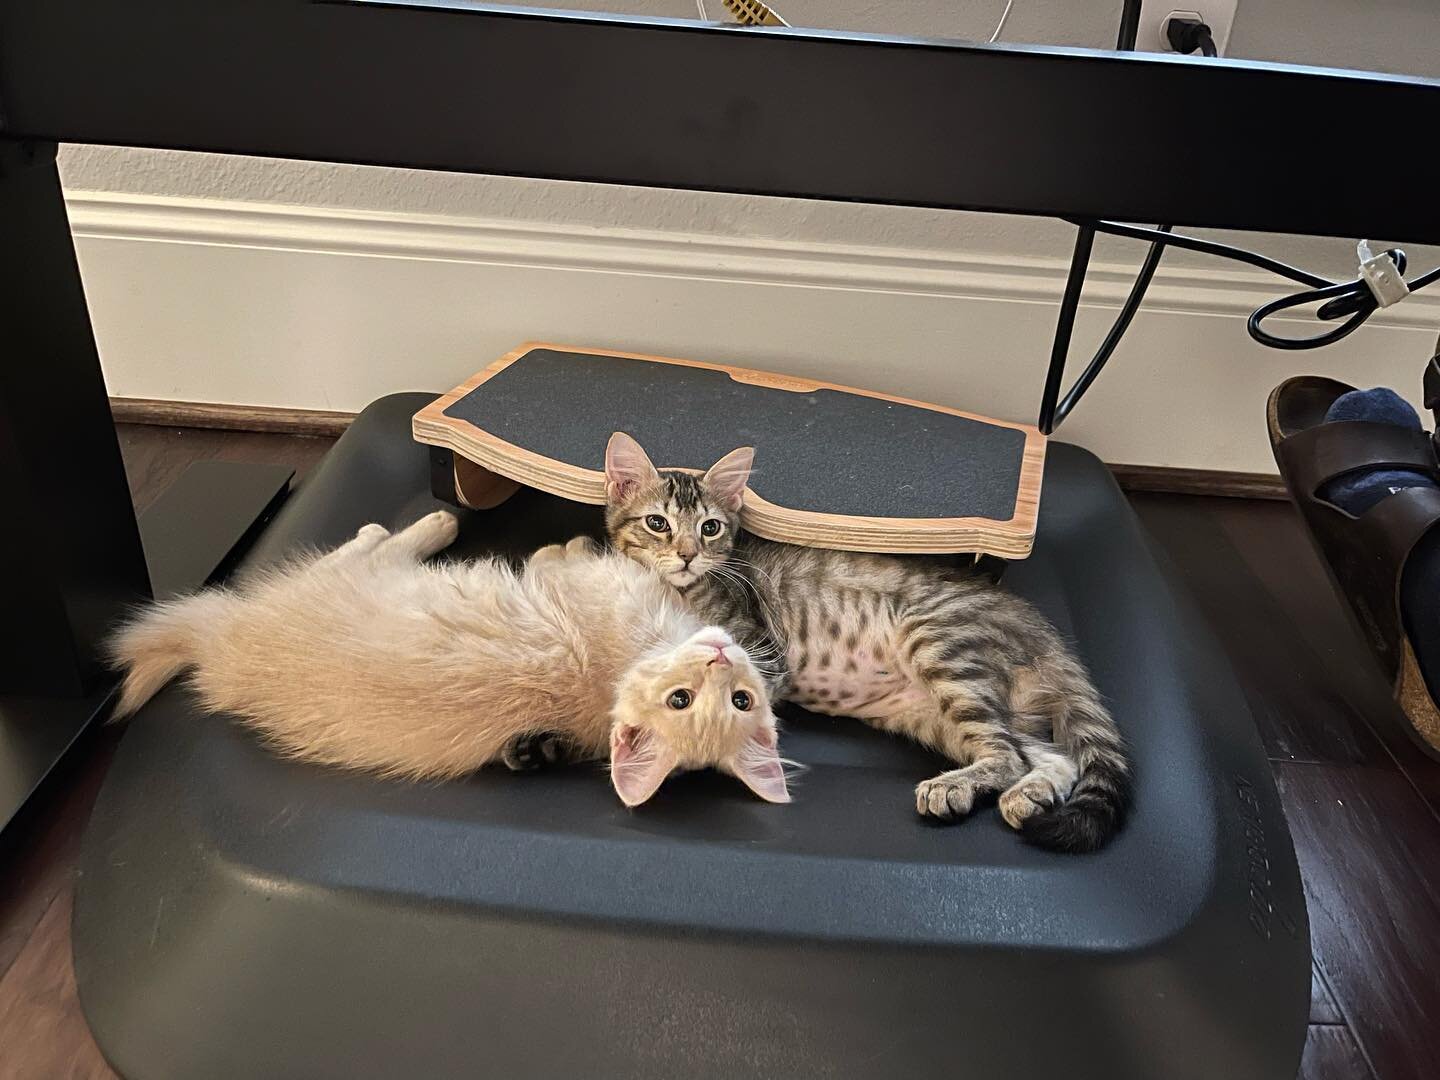 Remember Nancy and Dusty? We pulled these two out of a ditch as kittens. After a couple of months in our care, they were transported to Massachusetts, where they were eventually adopted together! Swipe to see how big they&rsquo;ve gotten